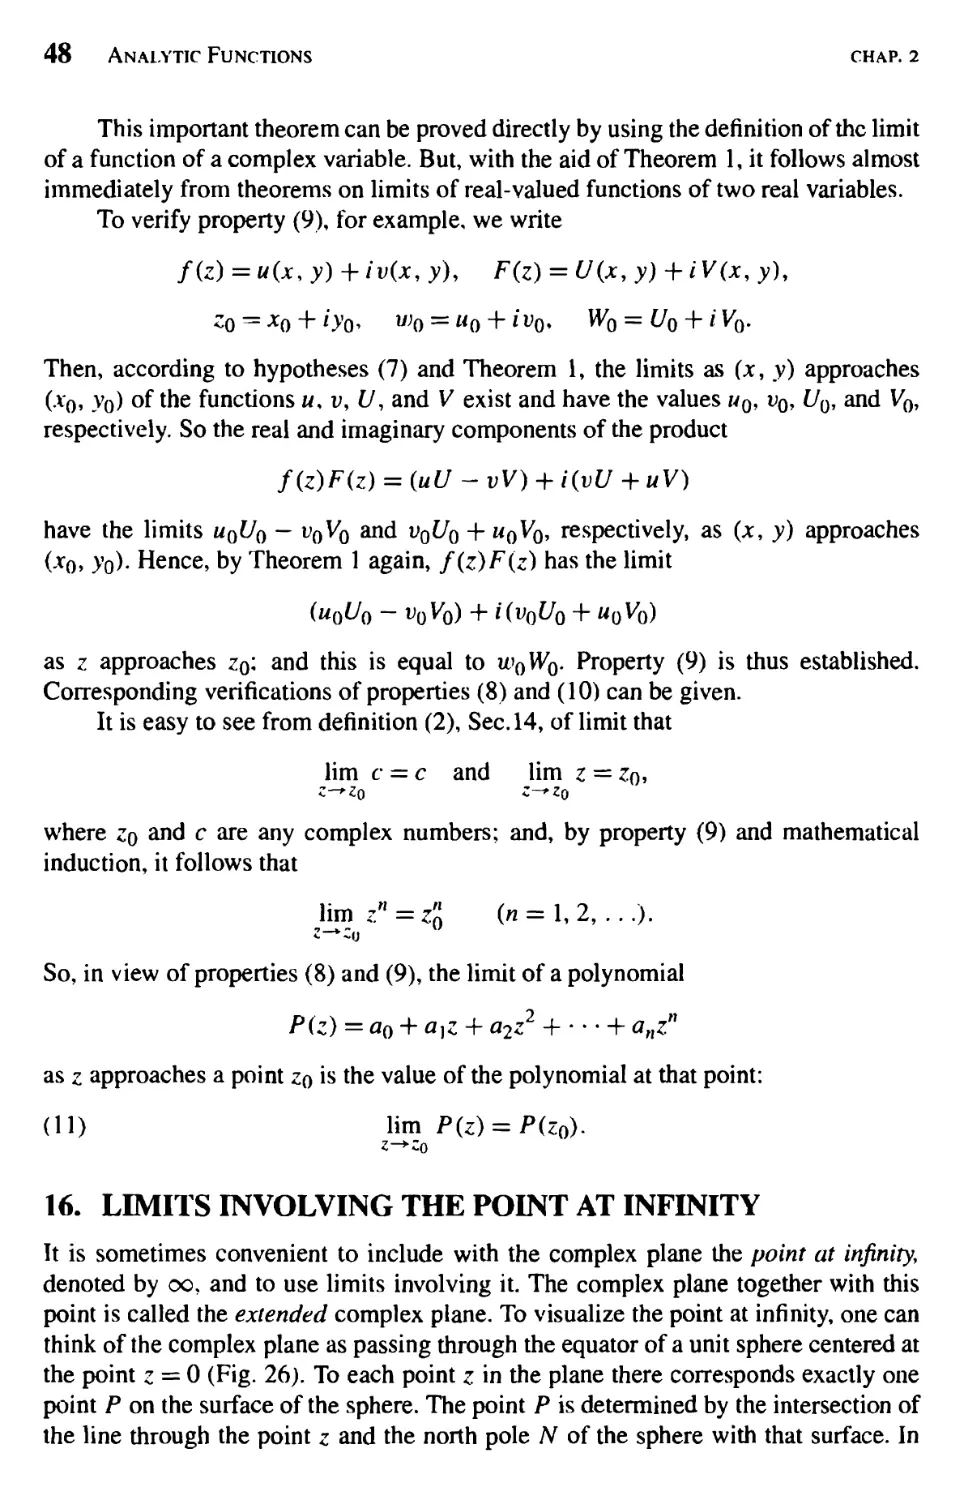 Limits Involving the Point at Infinity